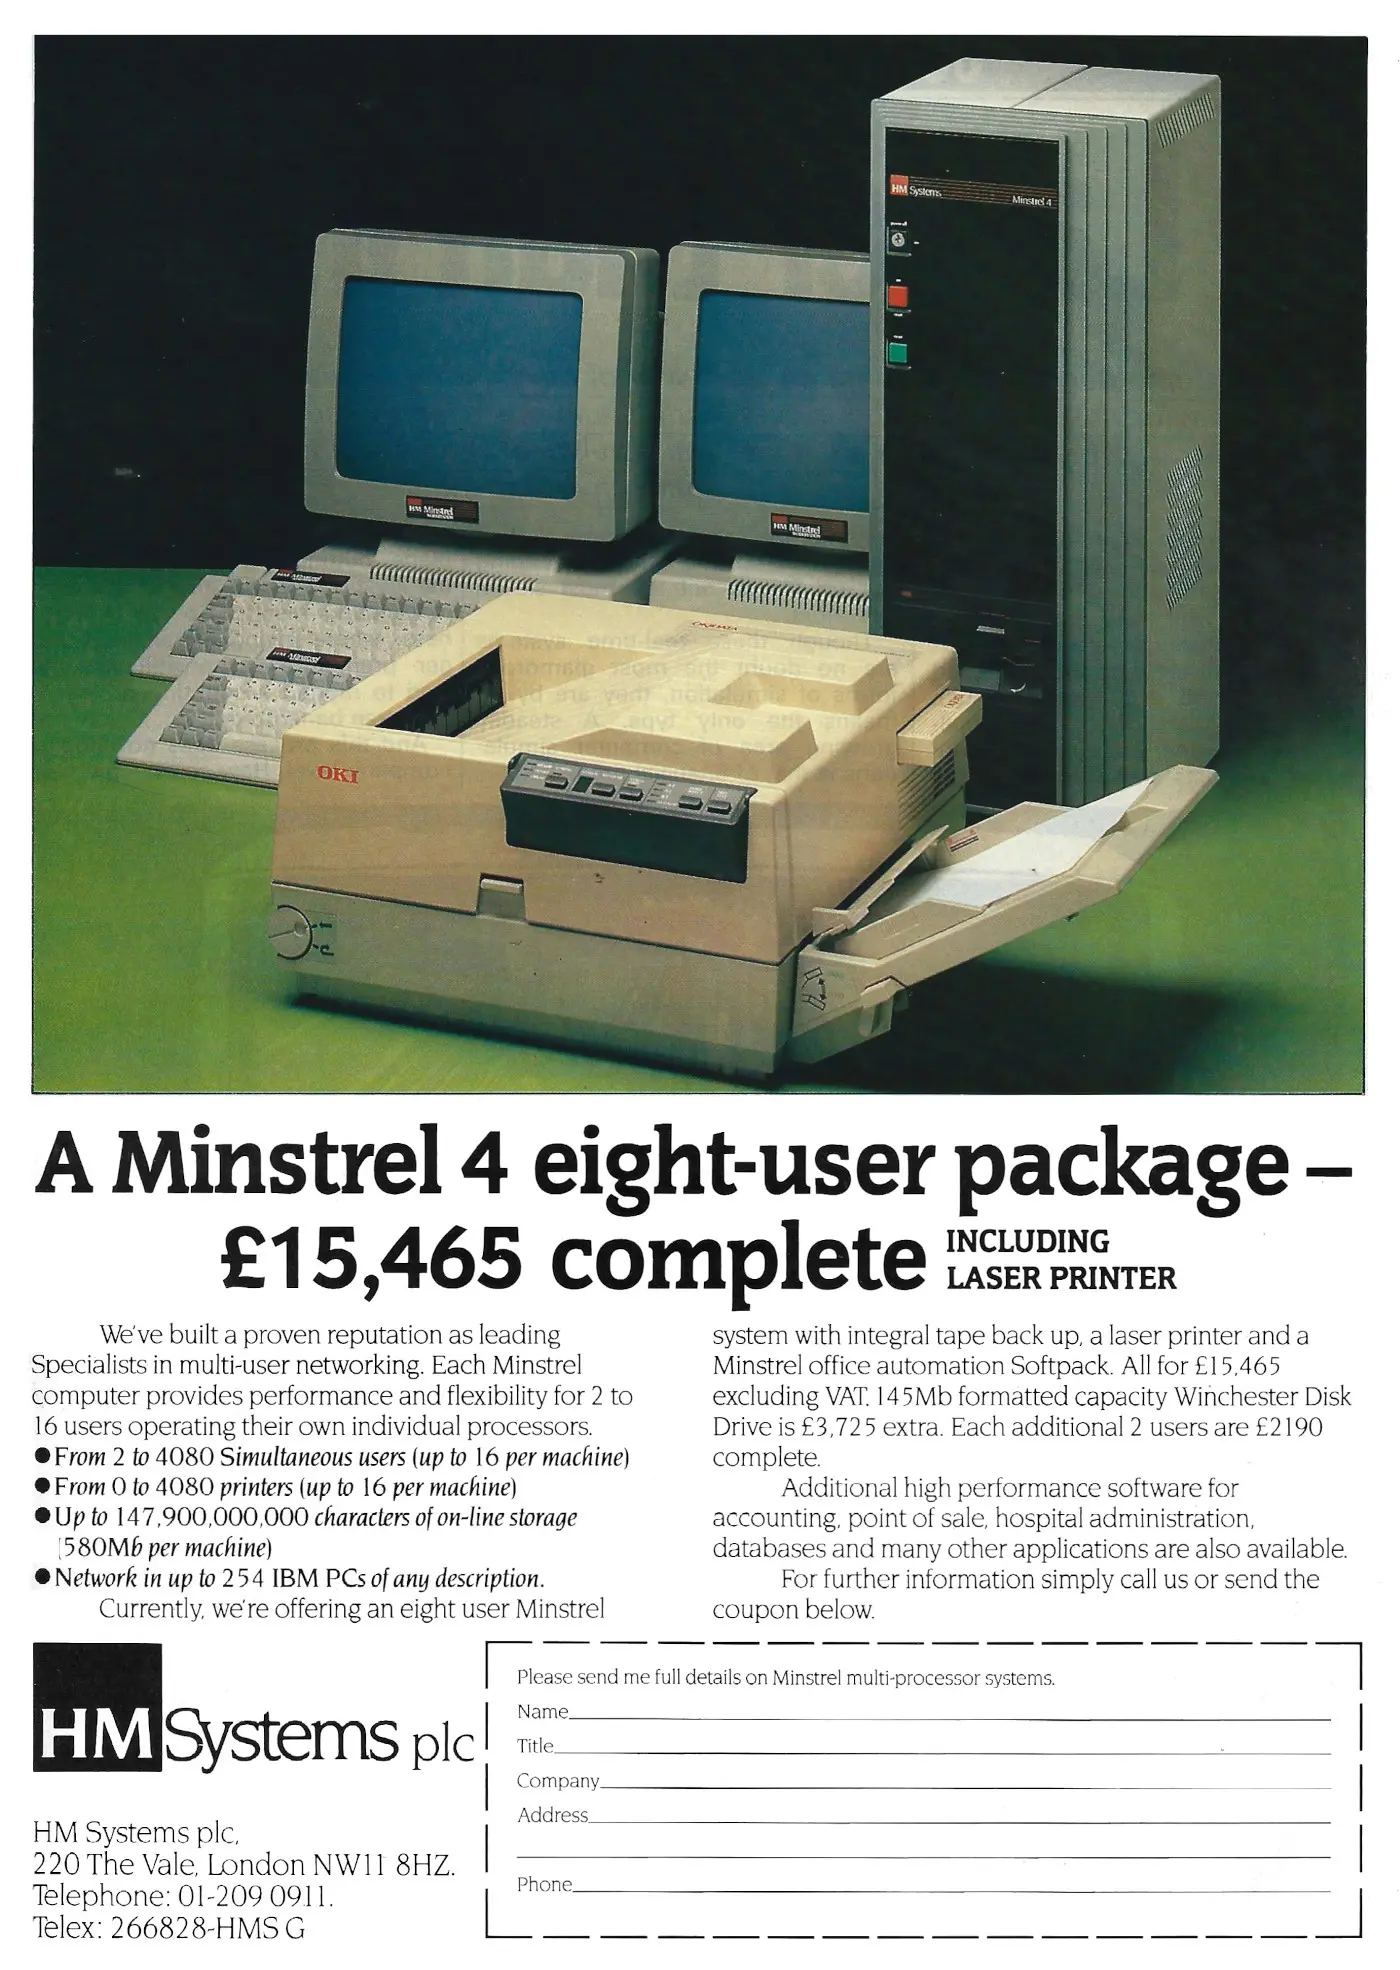 Hotel Microsystems Advert: A Minstrel 4 eight-user package - £15,564 complete, from Personal Computer World, August 1987